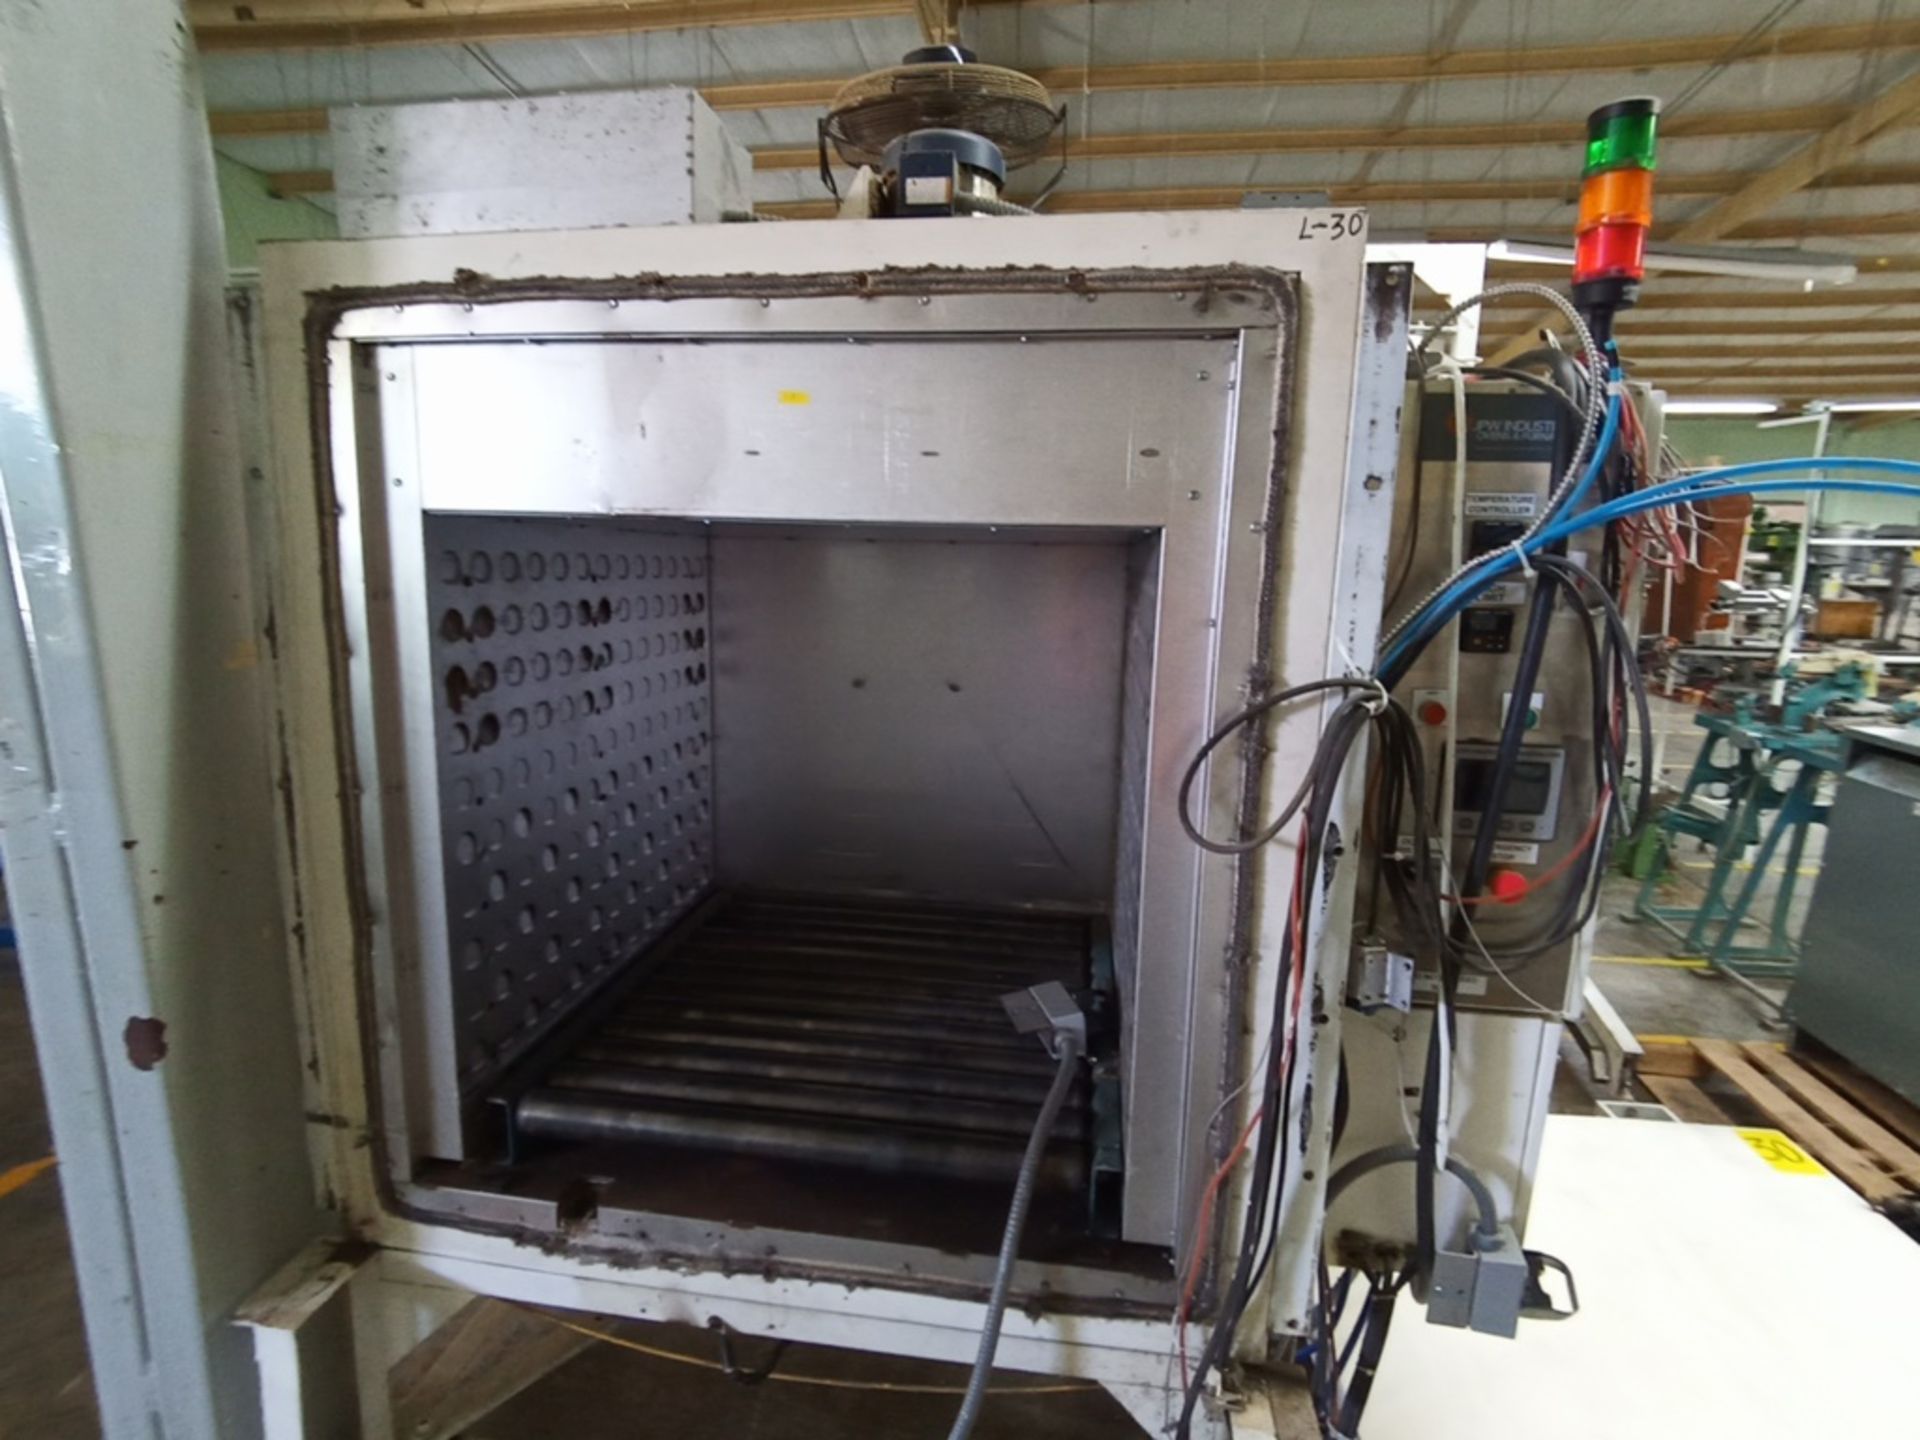 JPW Industrial Laboratory oven for drying S/N 001759, Year 2014, 480V/3PH/60Hz, - Image 8 of 25